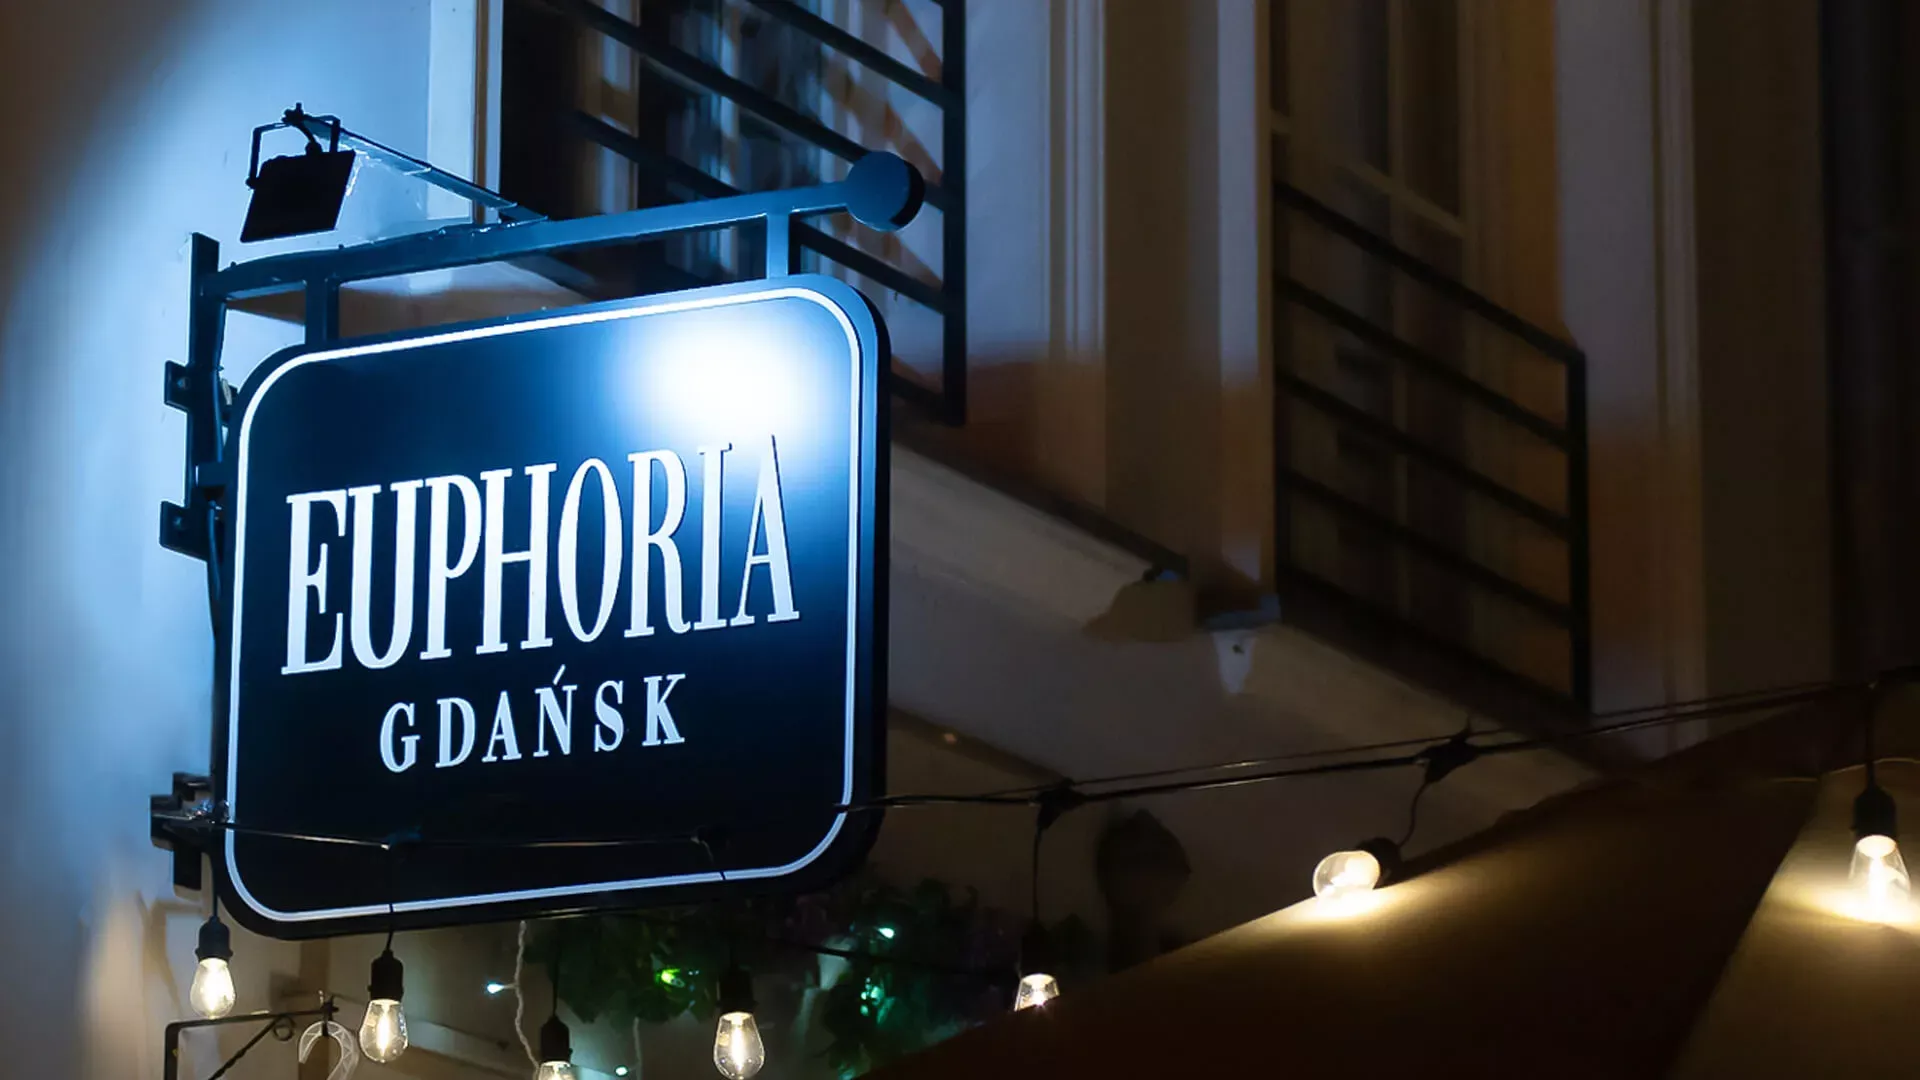 Euphoria Gdansk - Perpendicular semaphore, double-sided in black with white letters at night